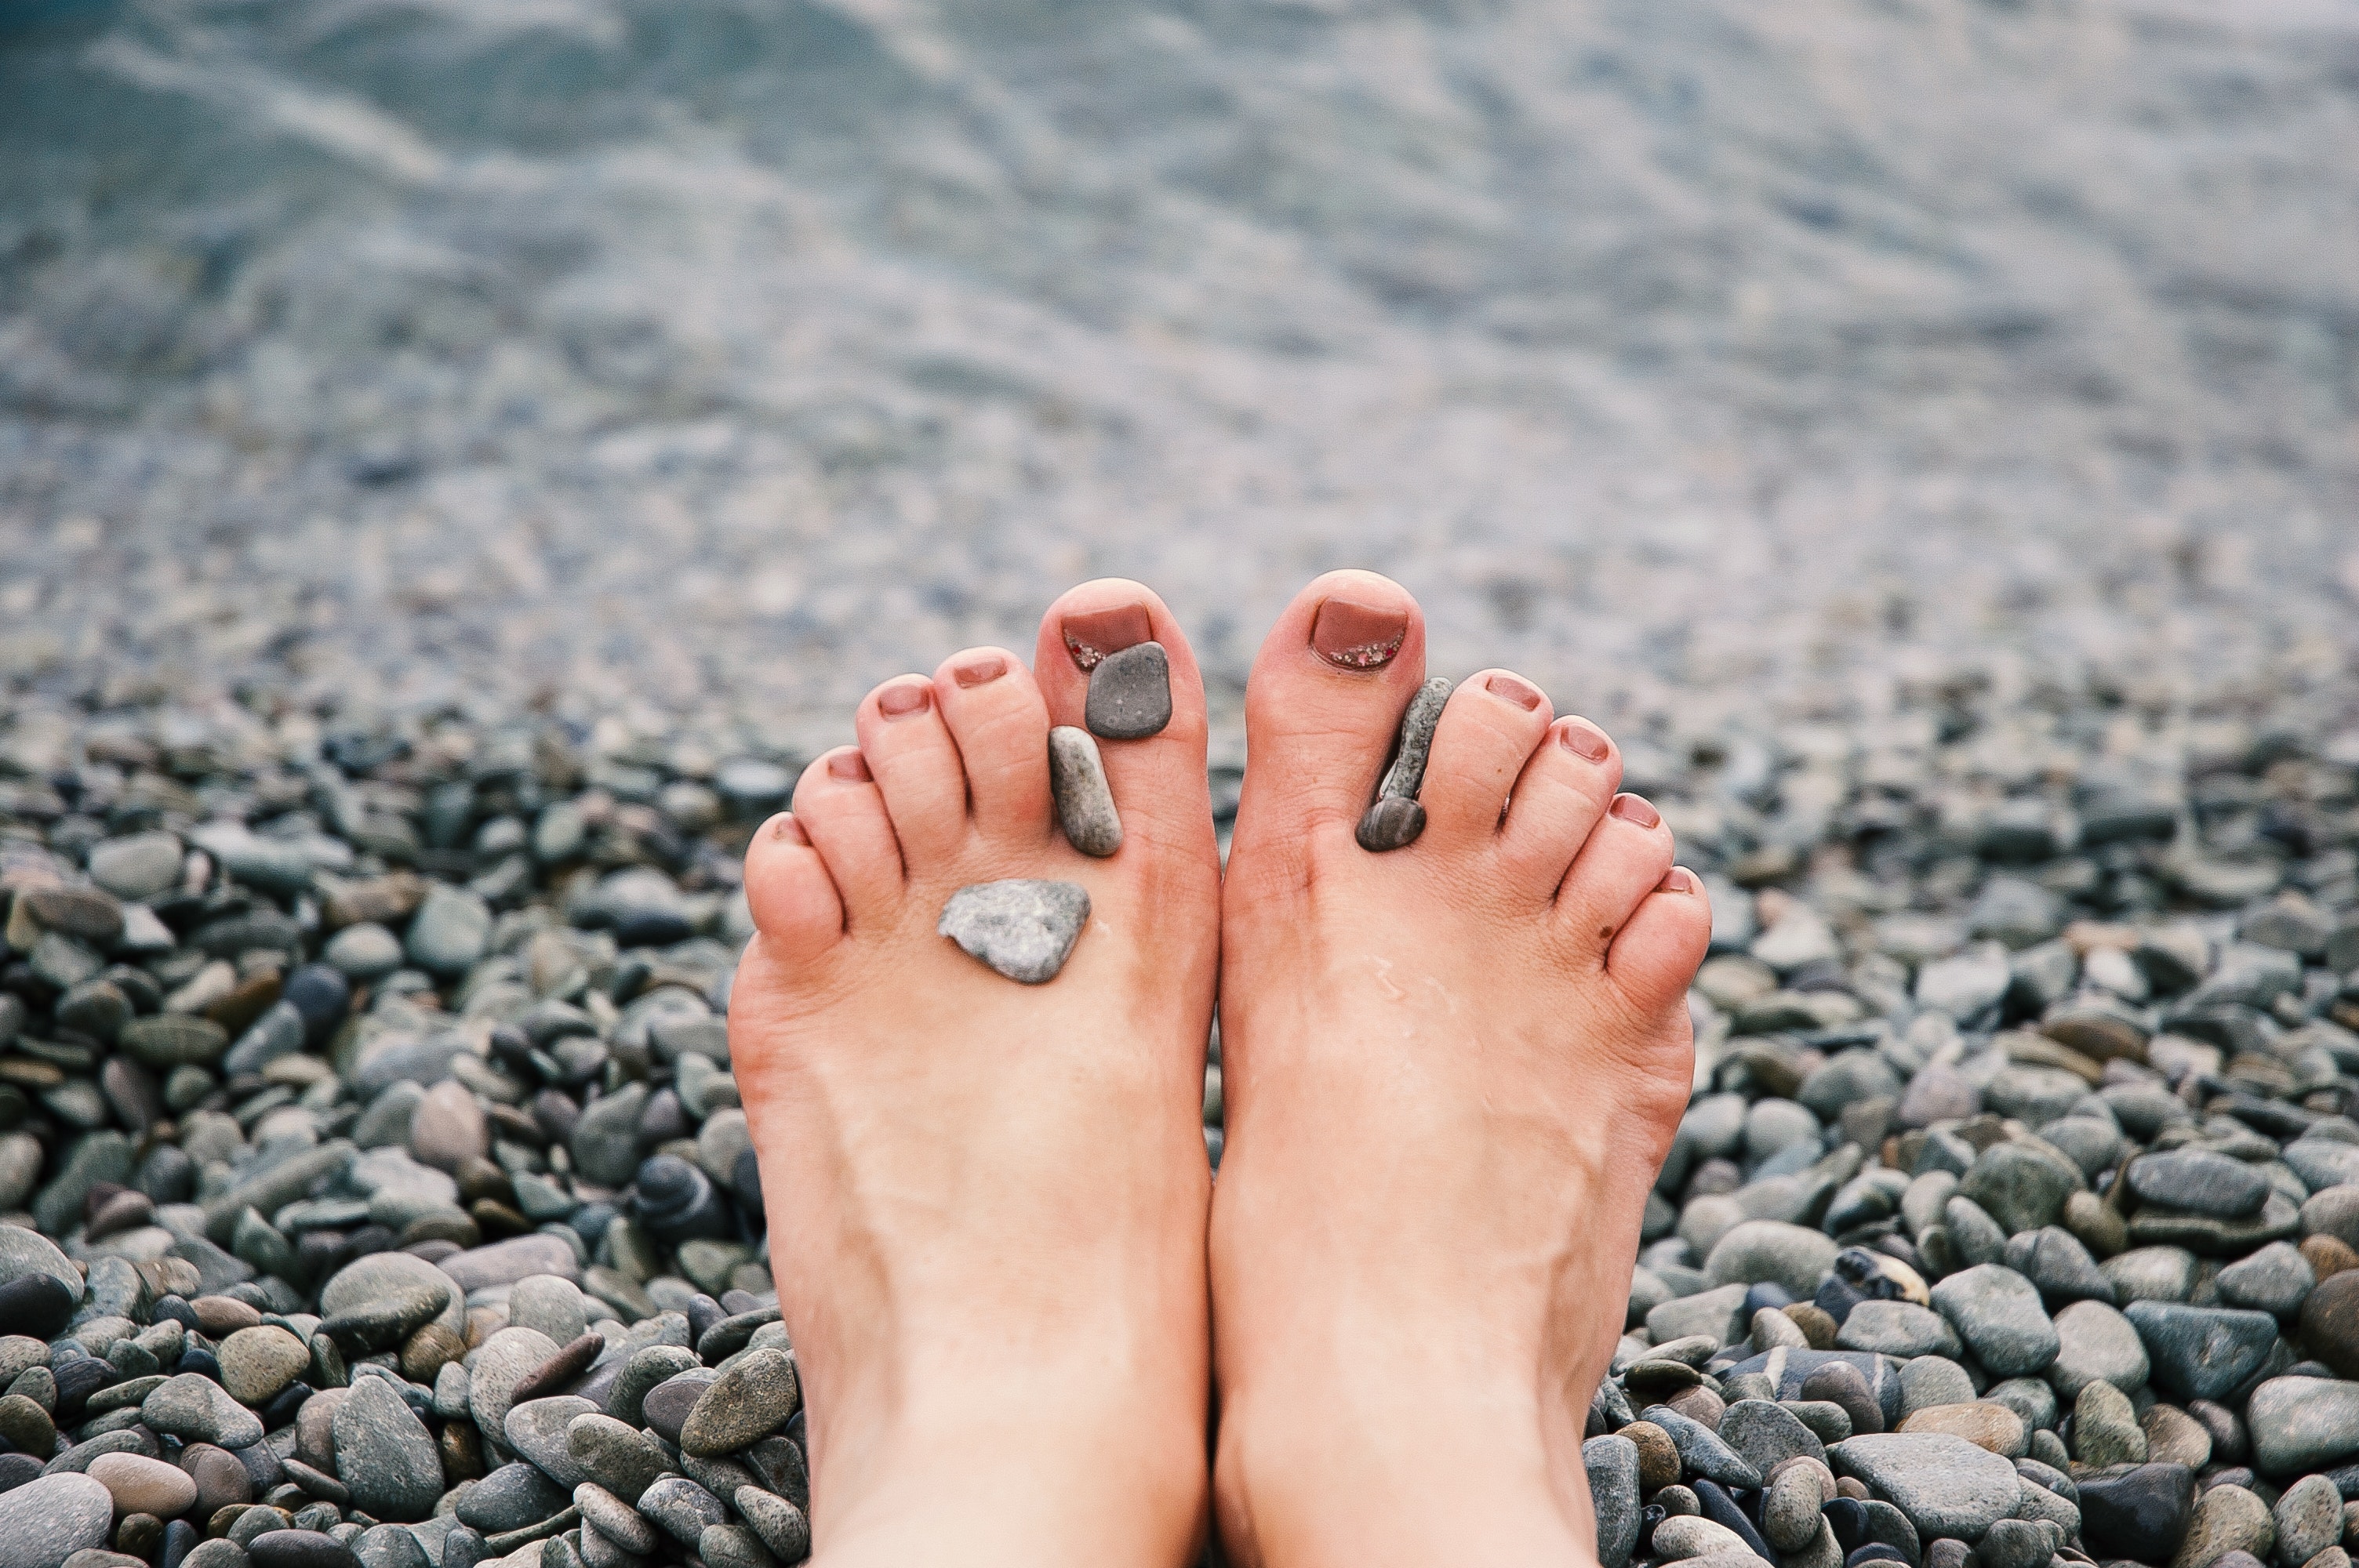 A woman's feet by the seaside